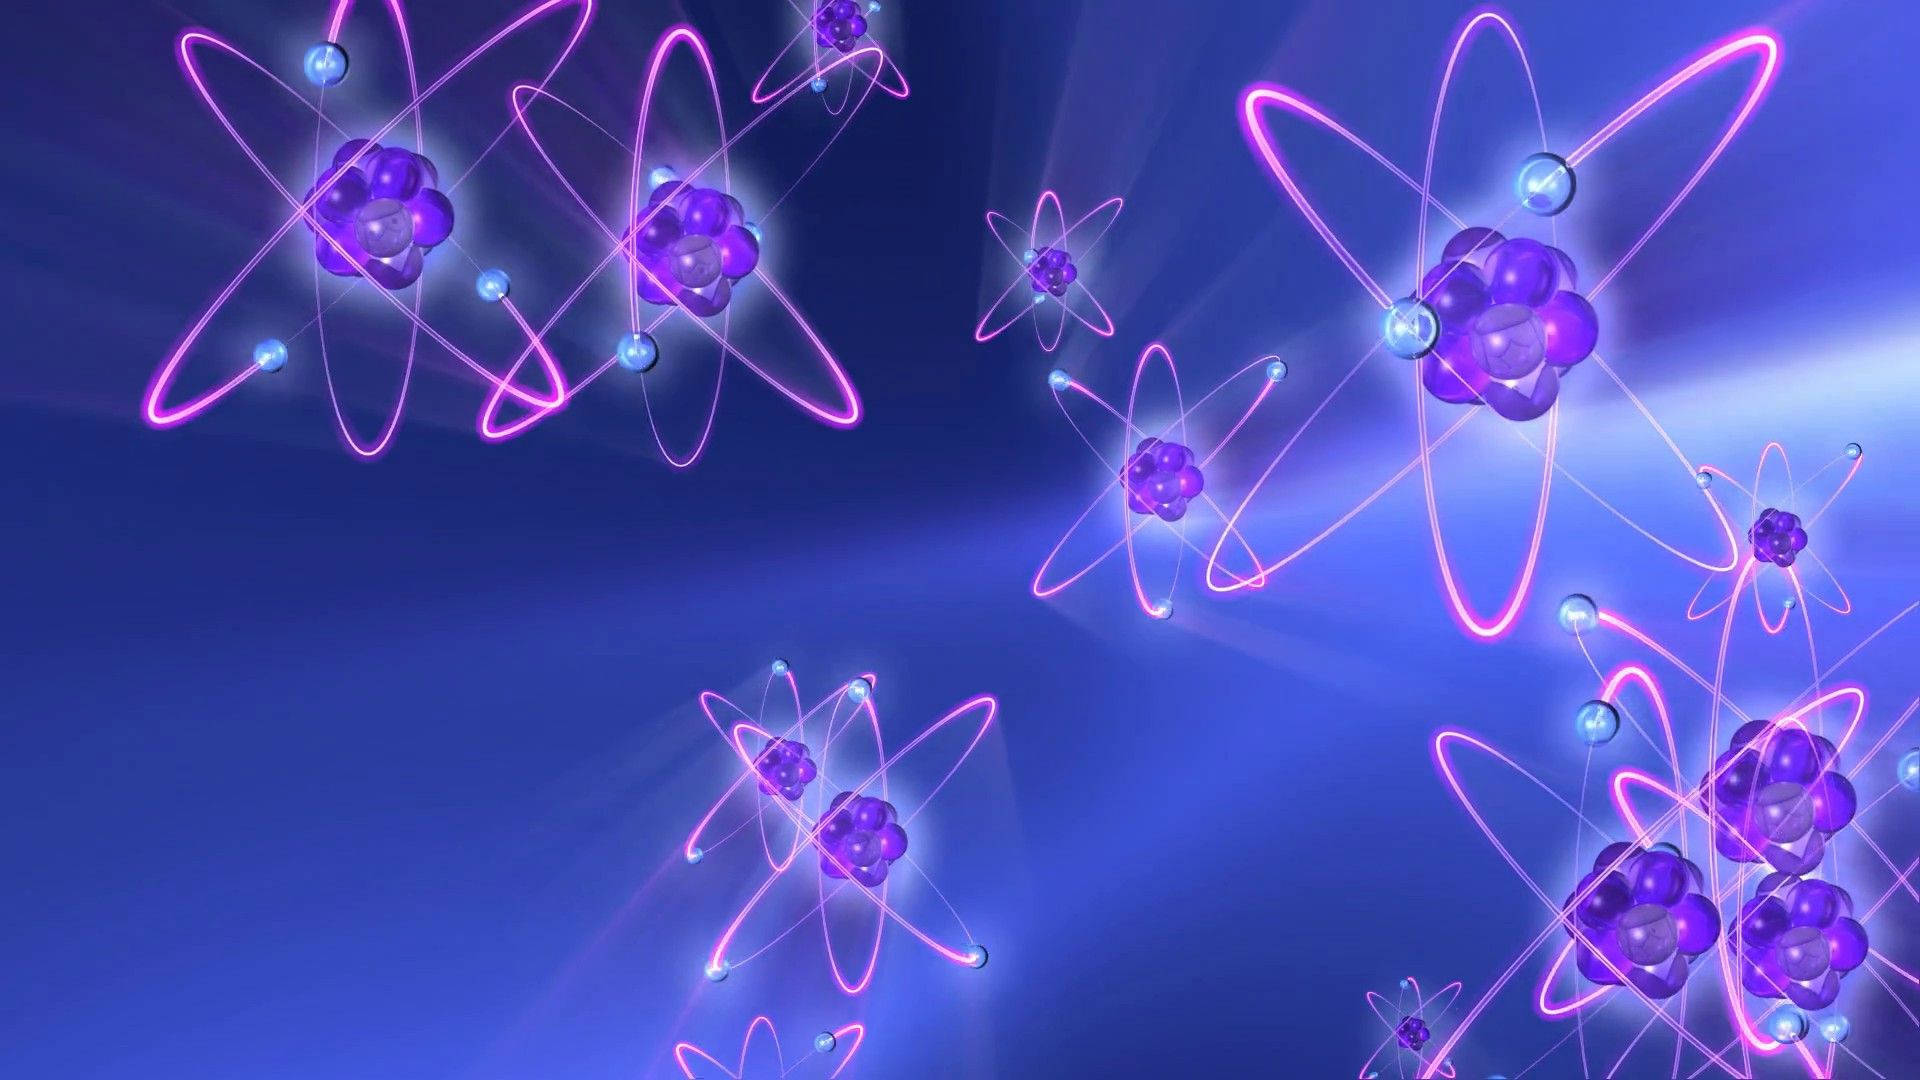 Aesthetic Atomic Structure of Science Wallpaper